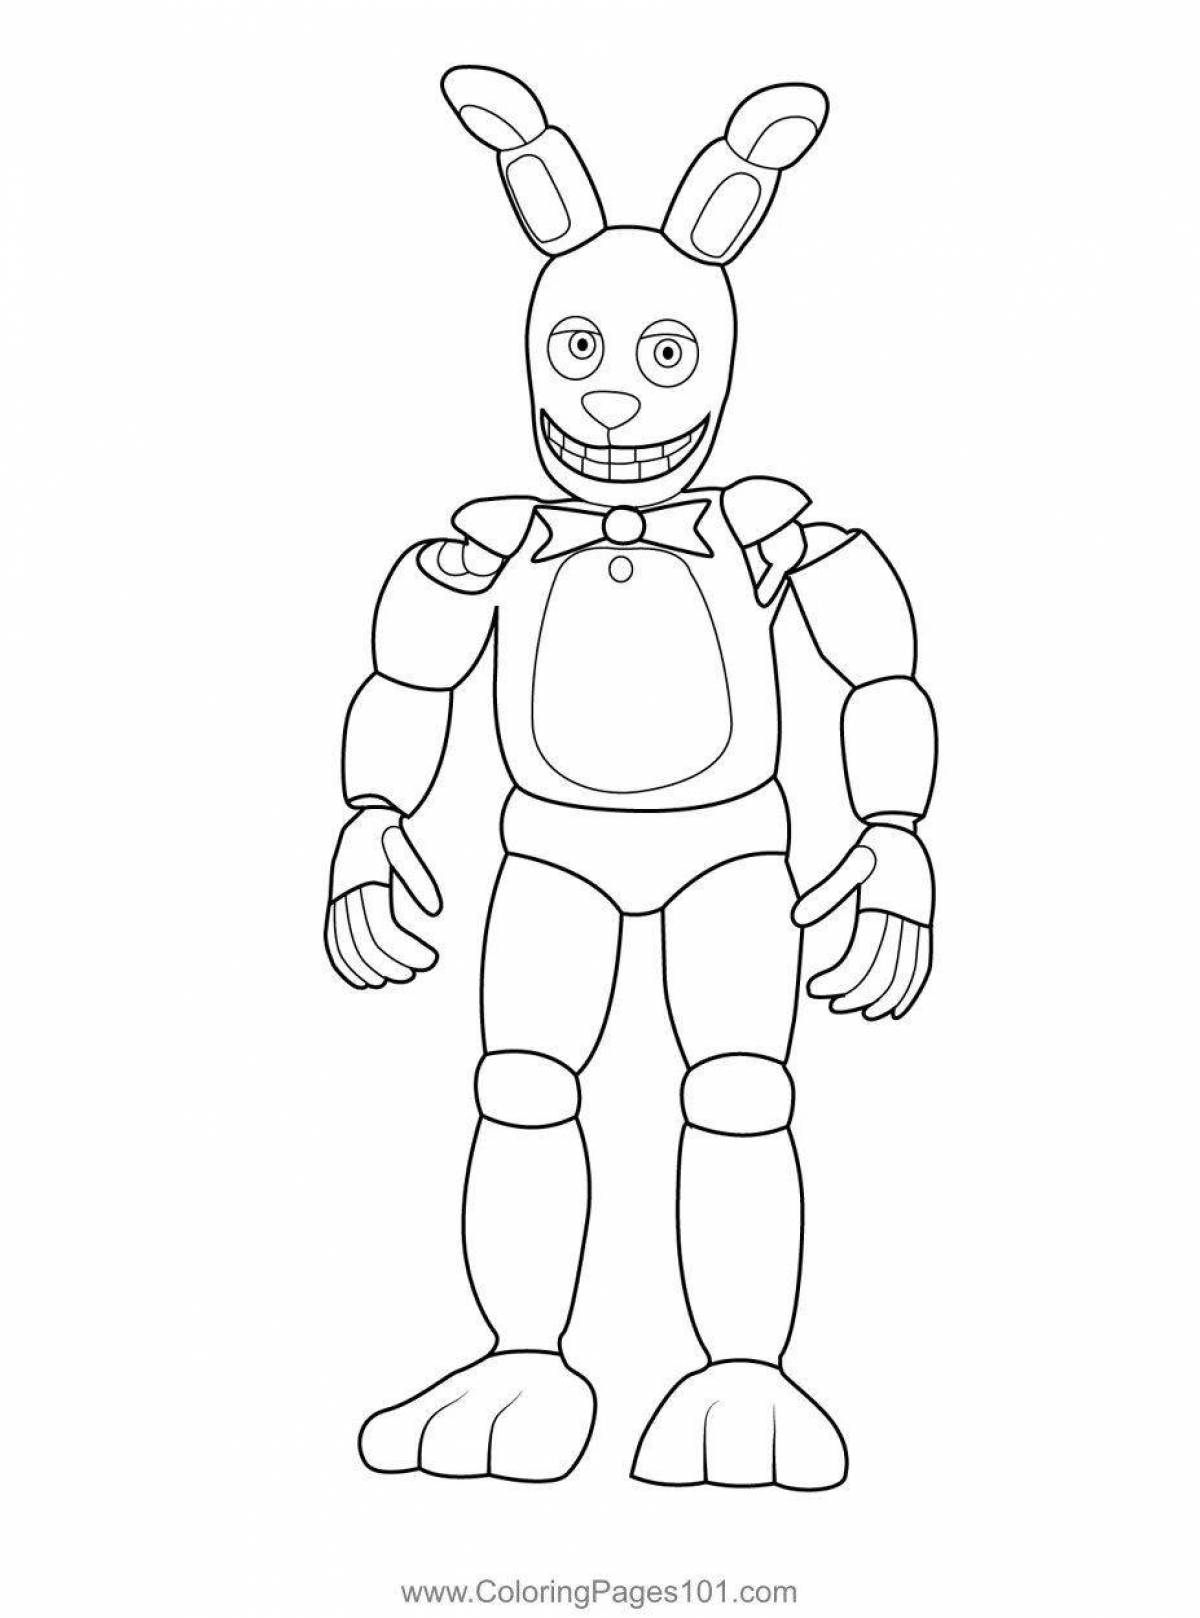 Fnaf 9 awesome coloring book for boys